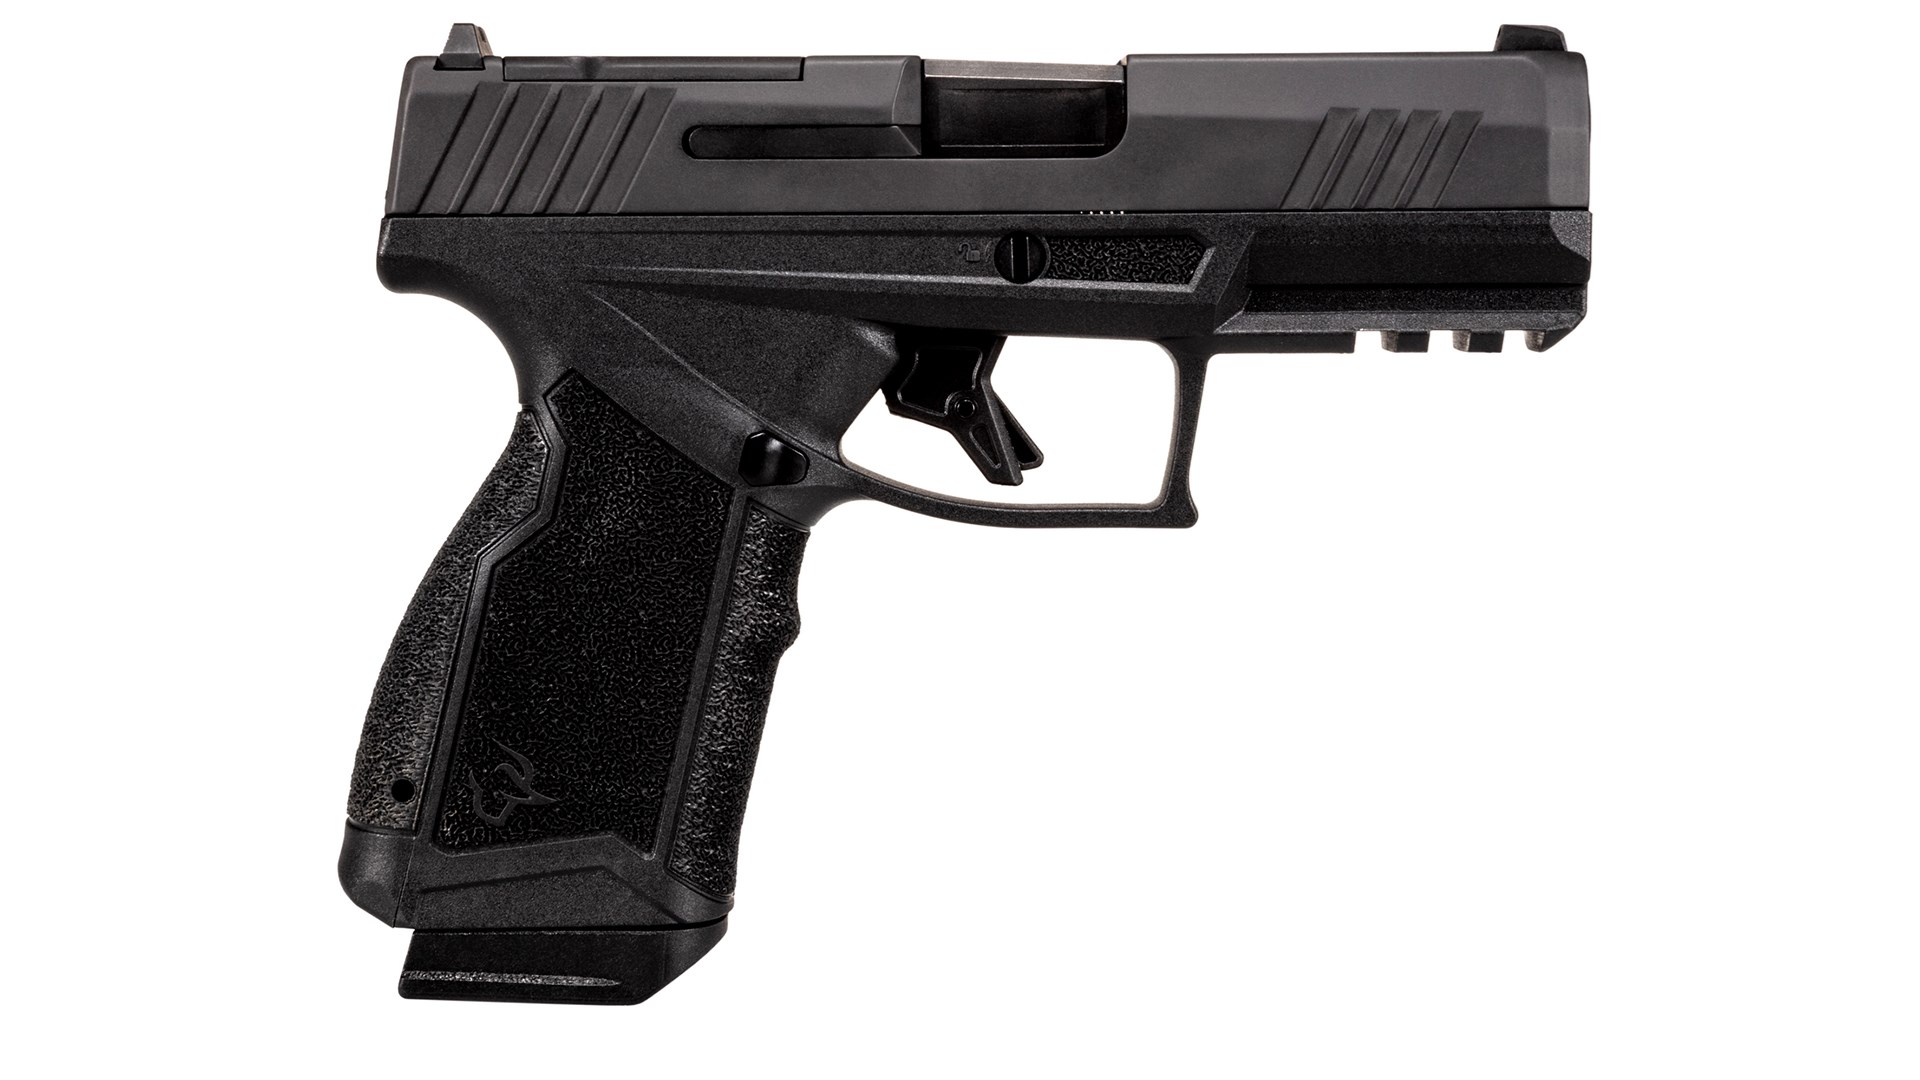 Right side of the all-black Taurus GX4 Carry pistol.